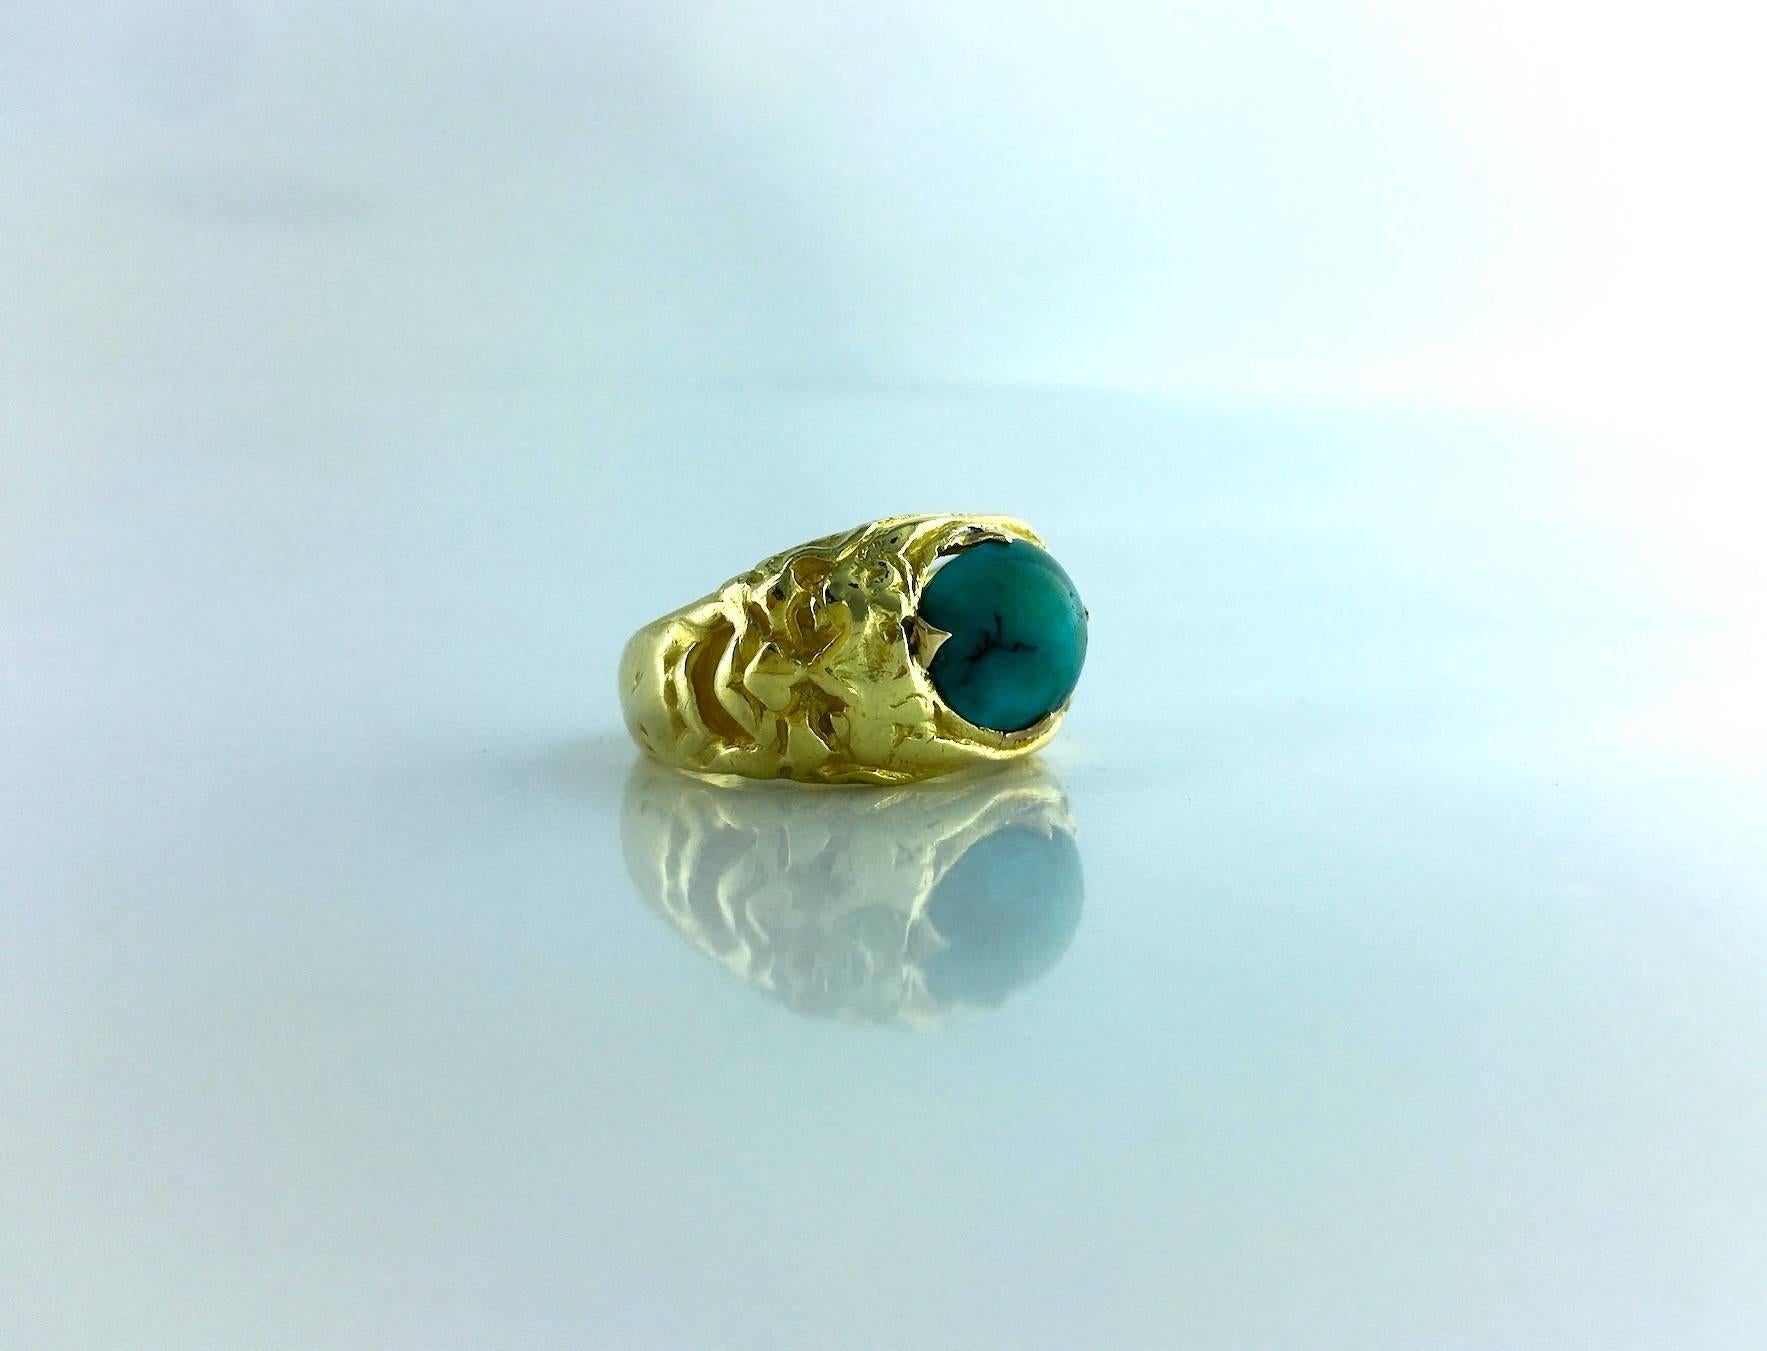 Incredible massive yellow gold 750 18k ring and engraved each side by grotesque faces. On the top a cabochon oval Turquoise.
French mark.
Circa 1900.
Gross weight: 16.60 grams.

